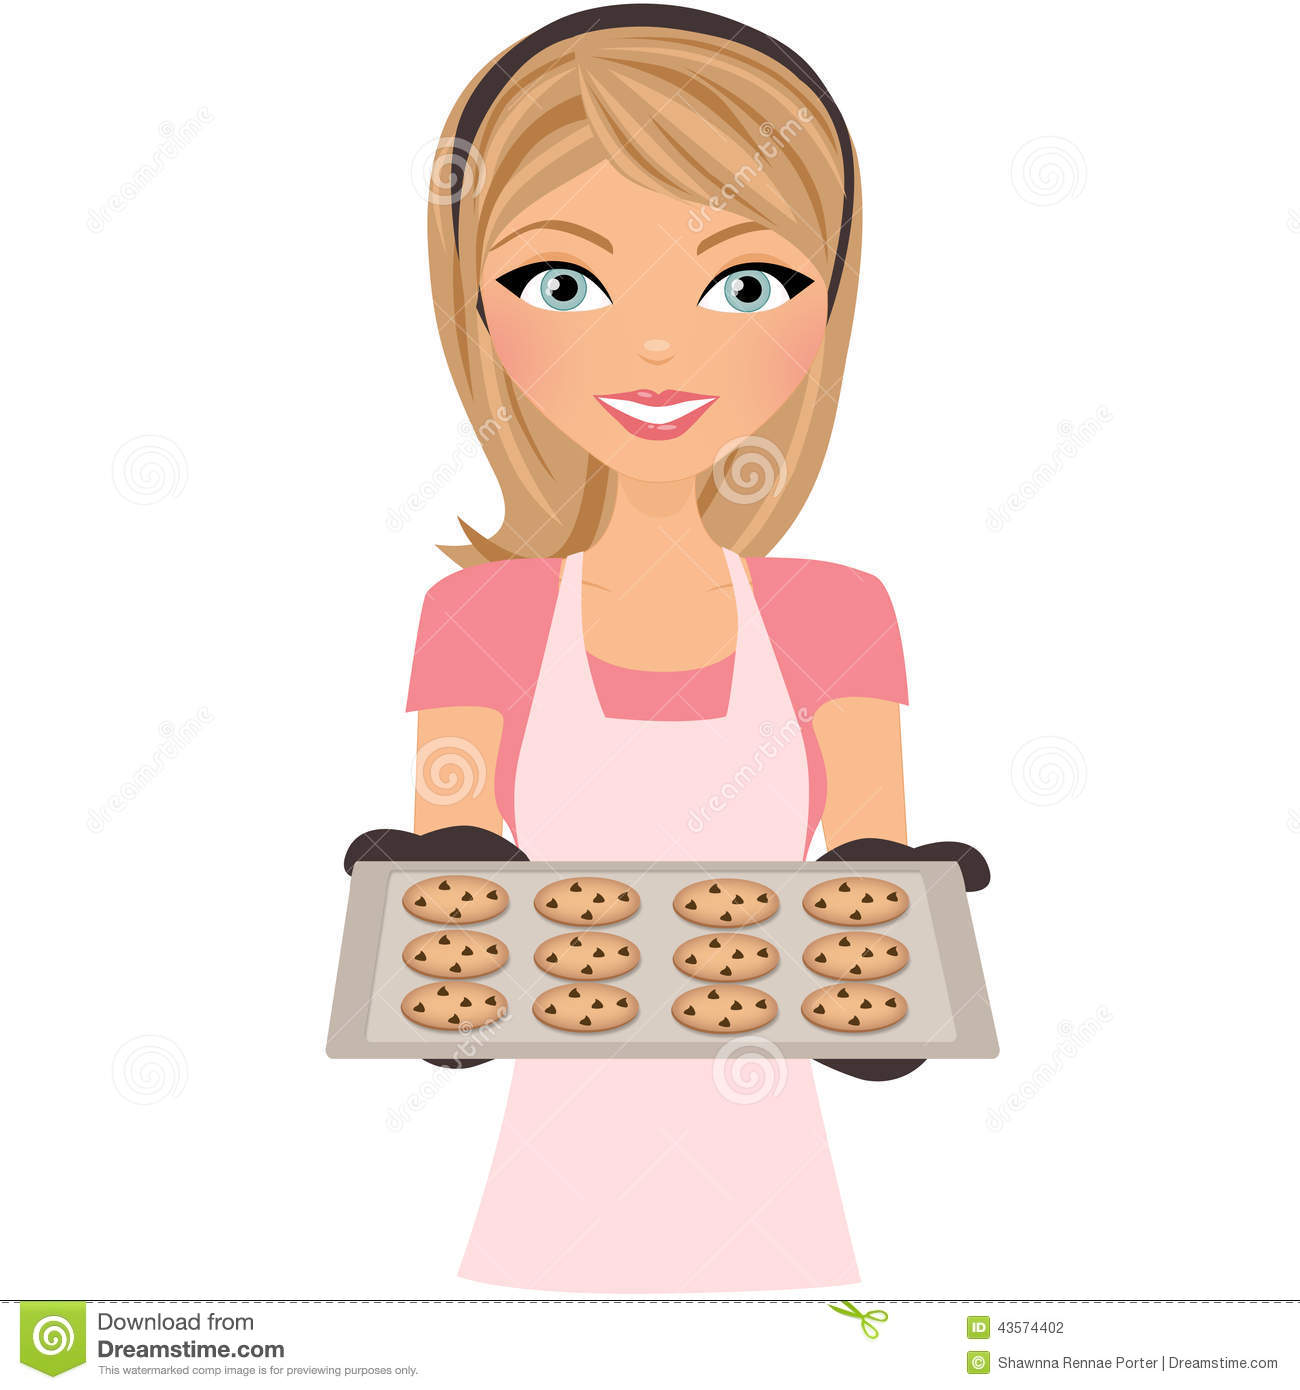 Baker Woman In Pink Apron Holding Freshly Baked Chocolate Chip Cookies